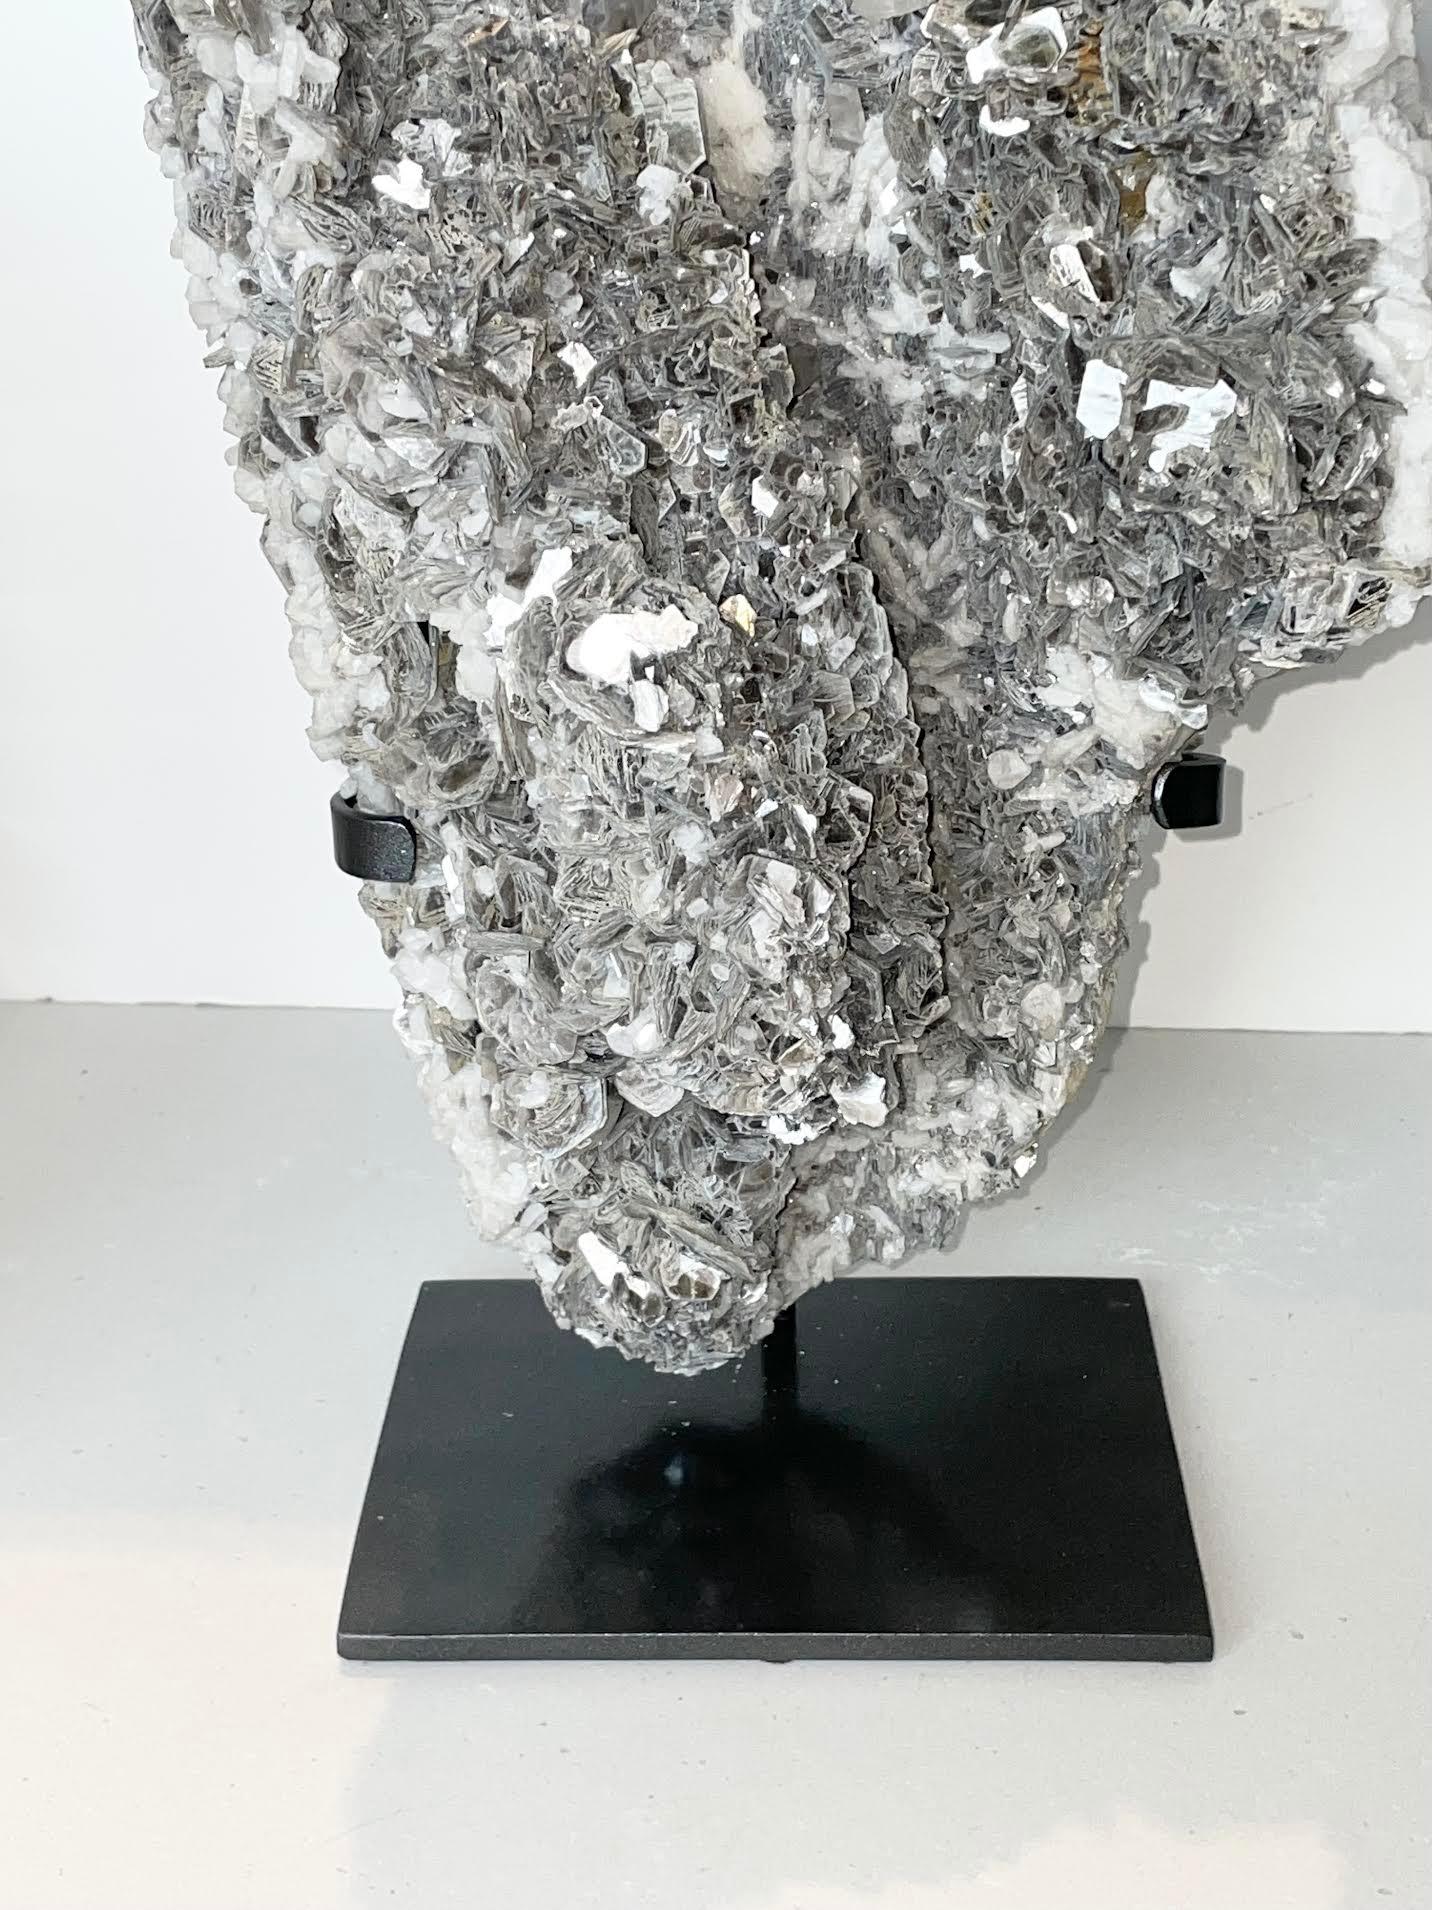 Brazilian large piece of mica mounted on a custom steel stand.
Mica is a shiny silicate mineral with a layered structure, found as minute scales
 in granite and other rocks, or as crystals.
Measures: Stand 6.5